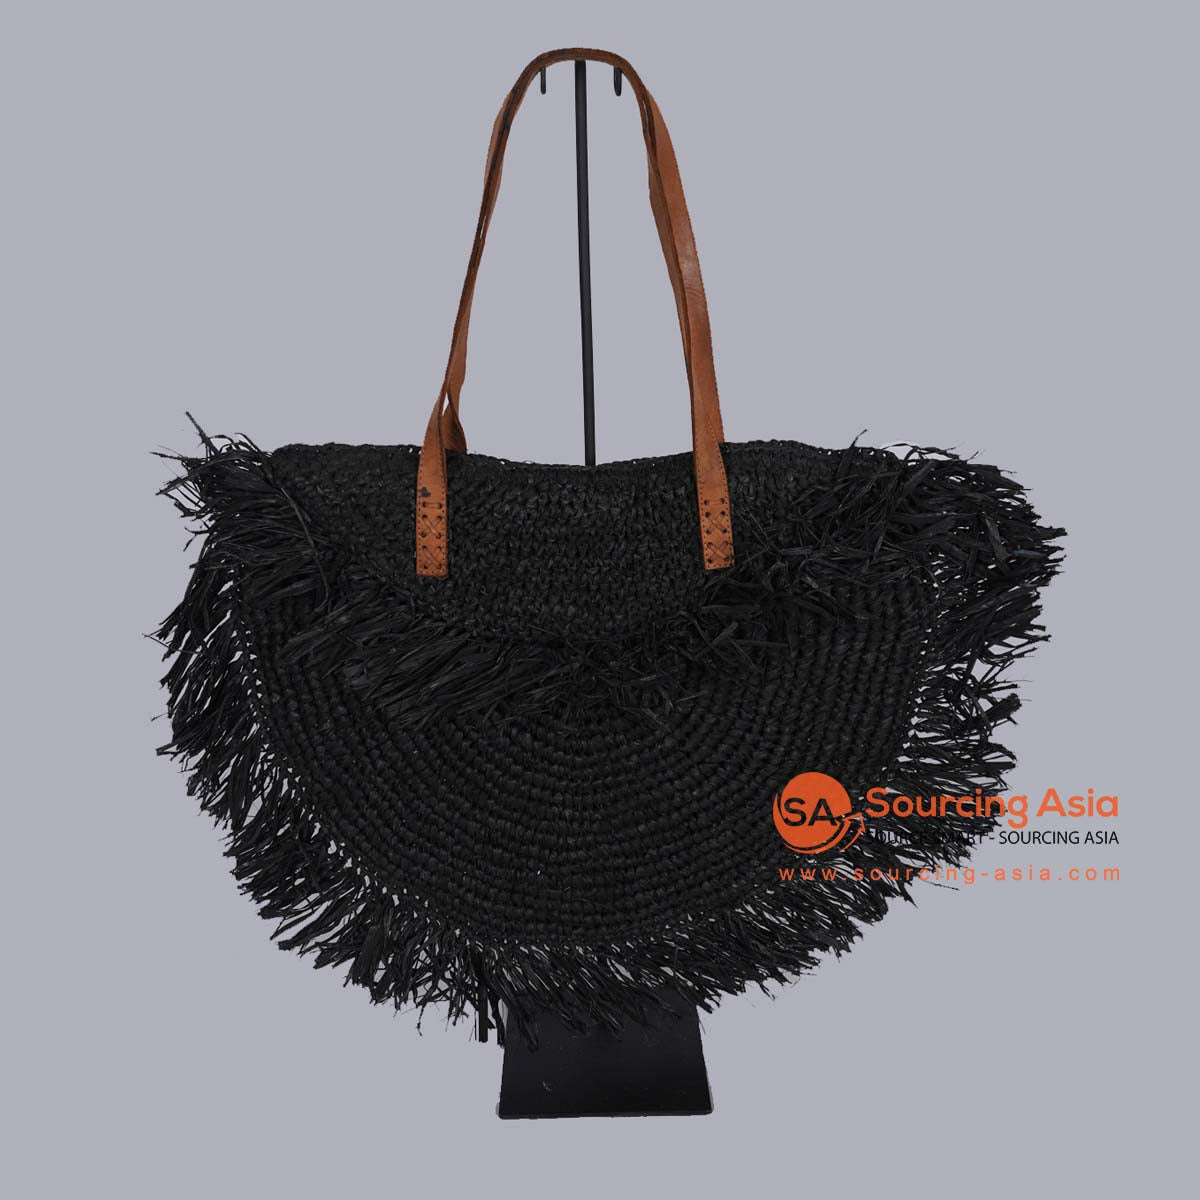 HBSC290 BLACK GAJIH BAG WITH FRINGE AND LEATHER HANDLE